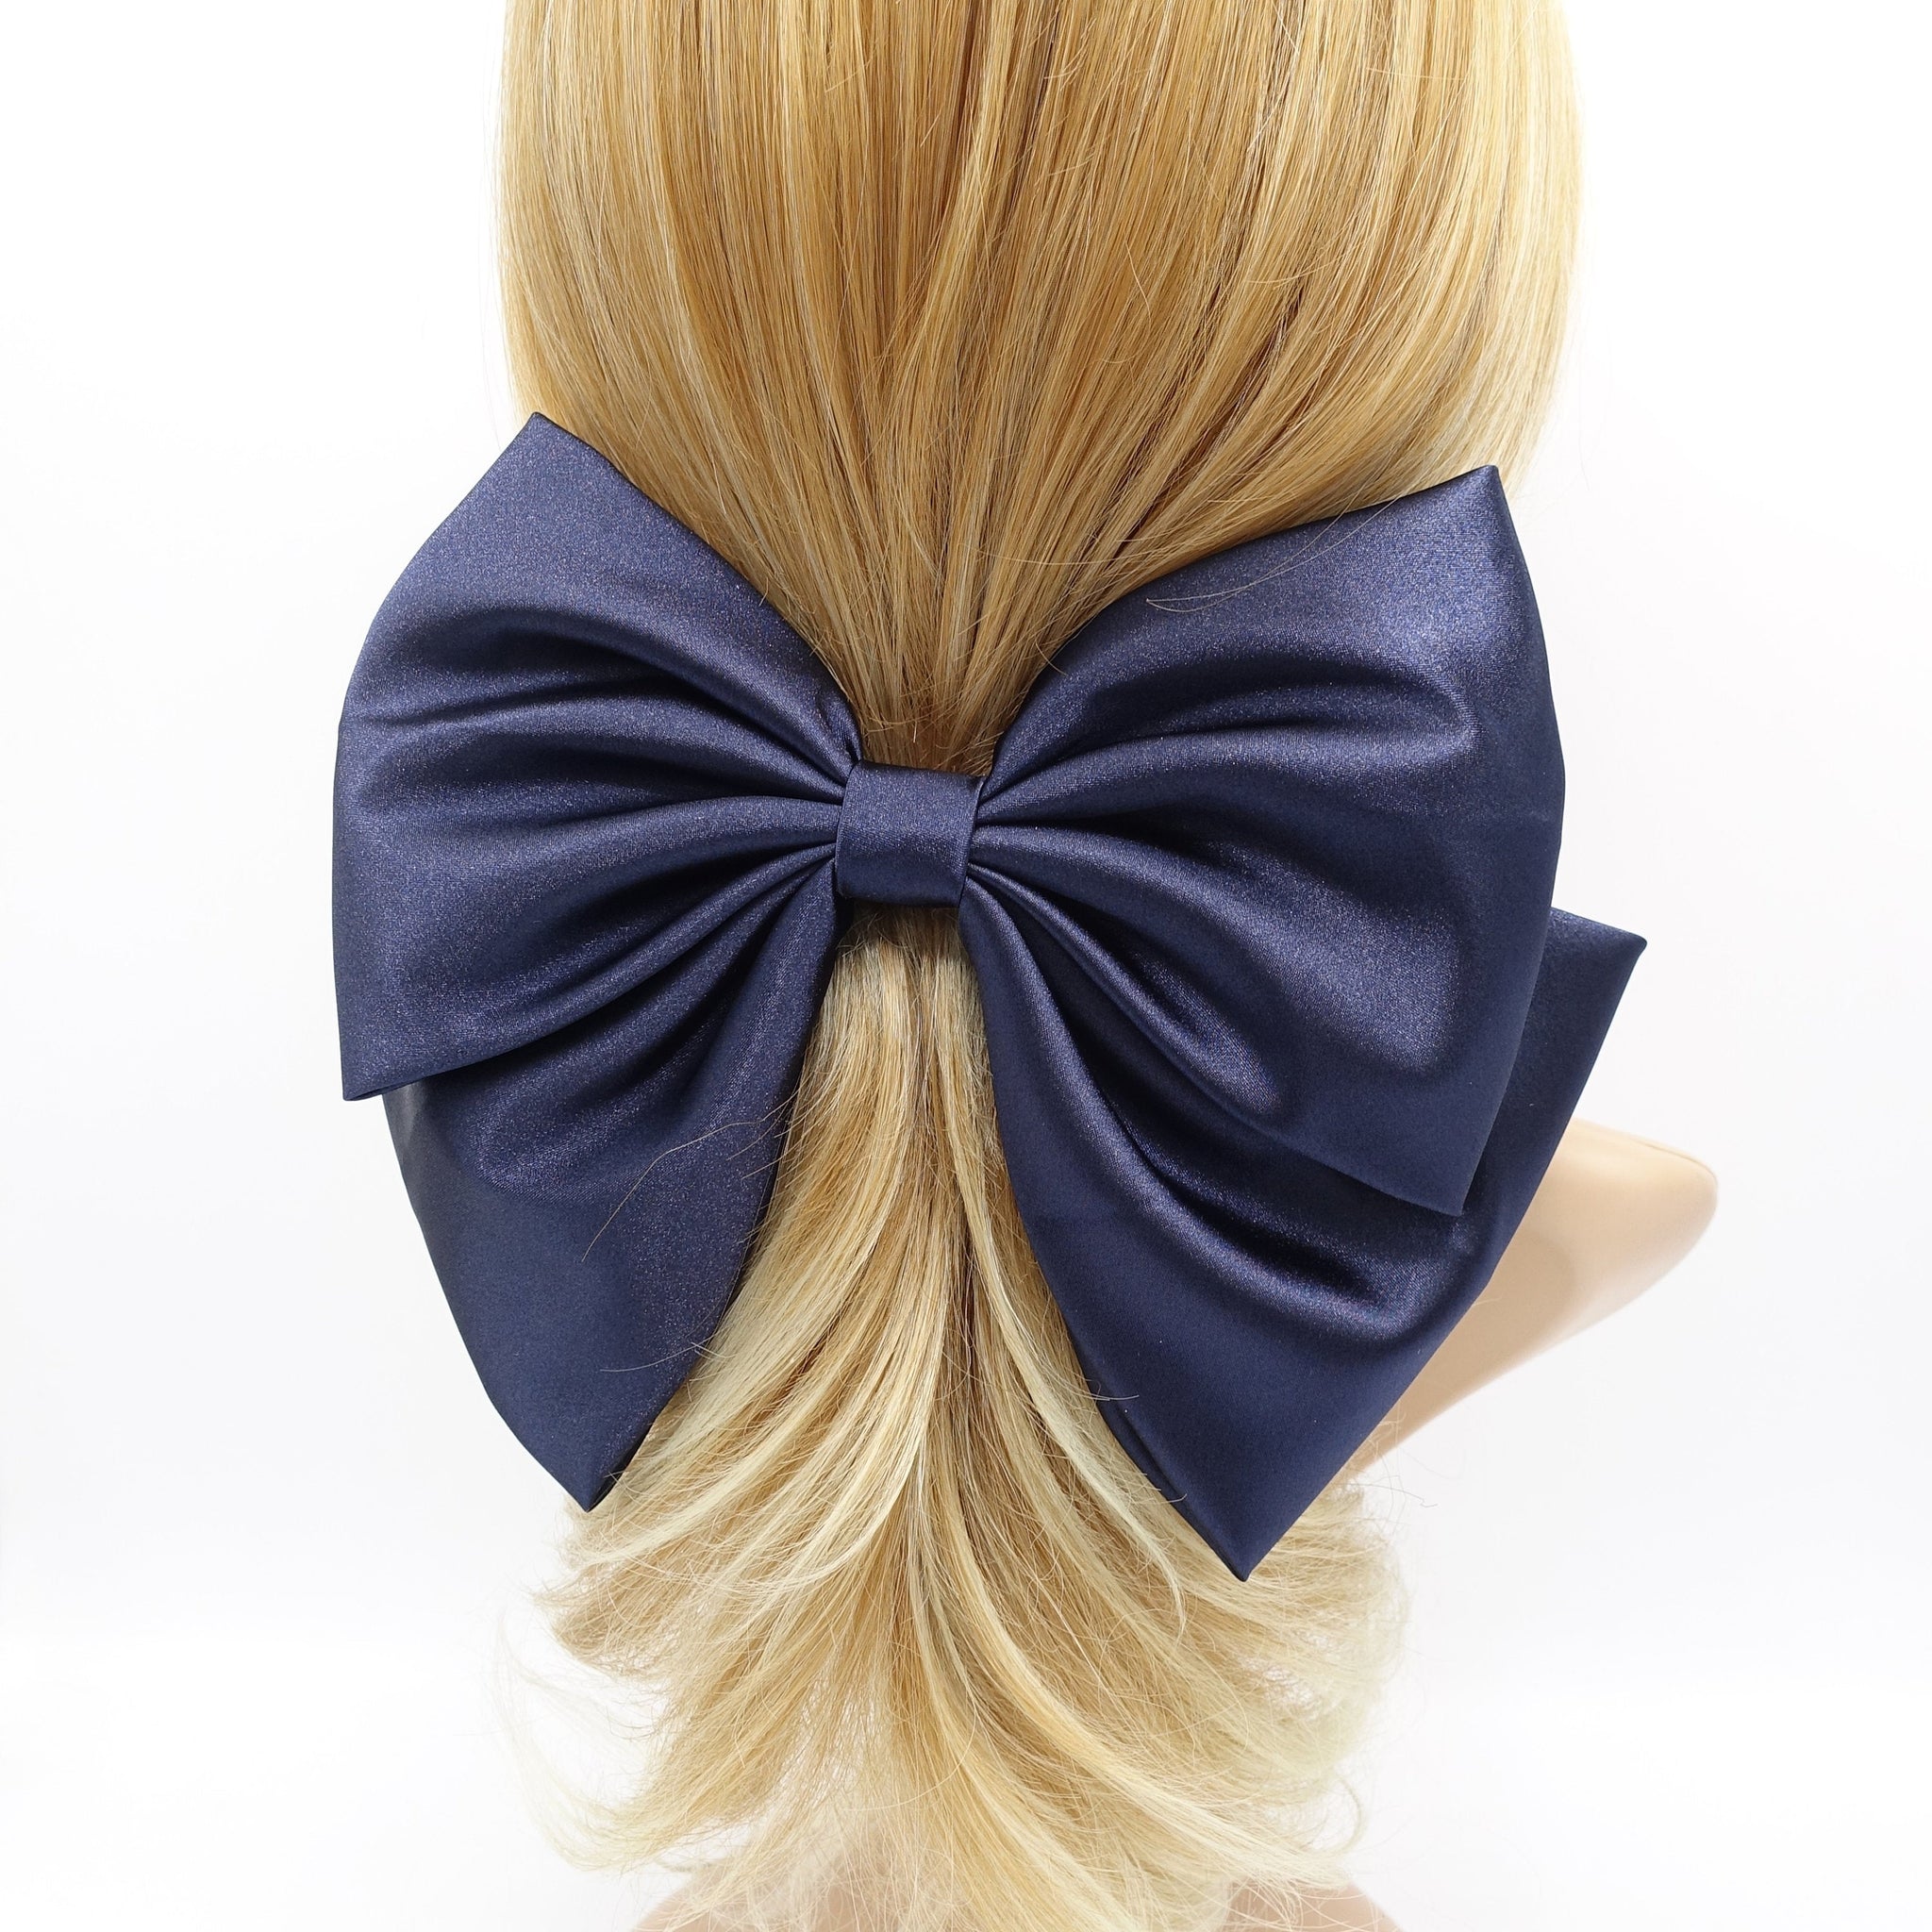 VeryShine large glossy hair bow satin hair accessory for women